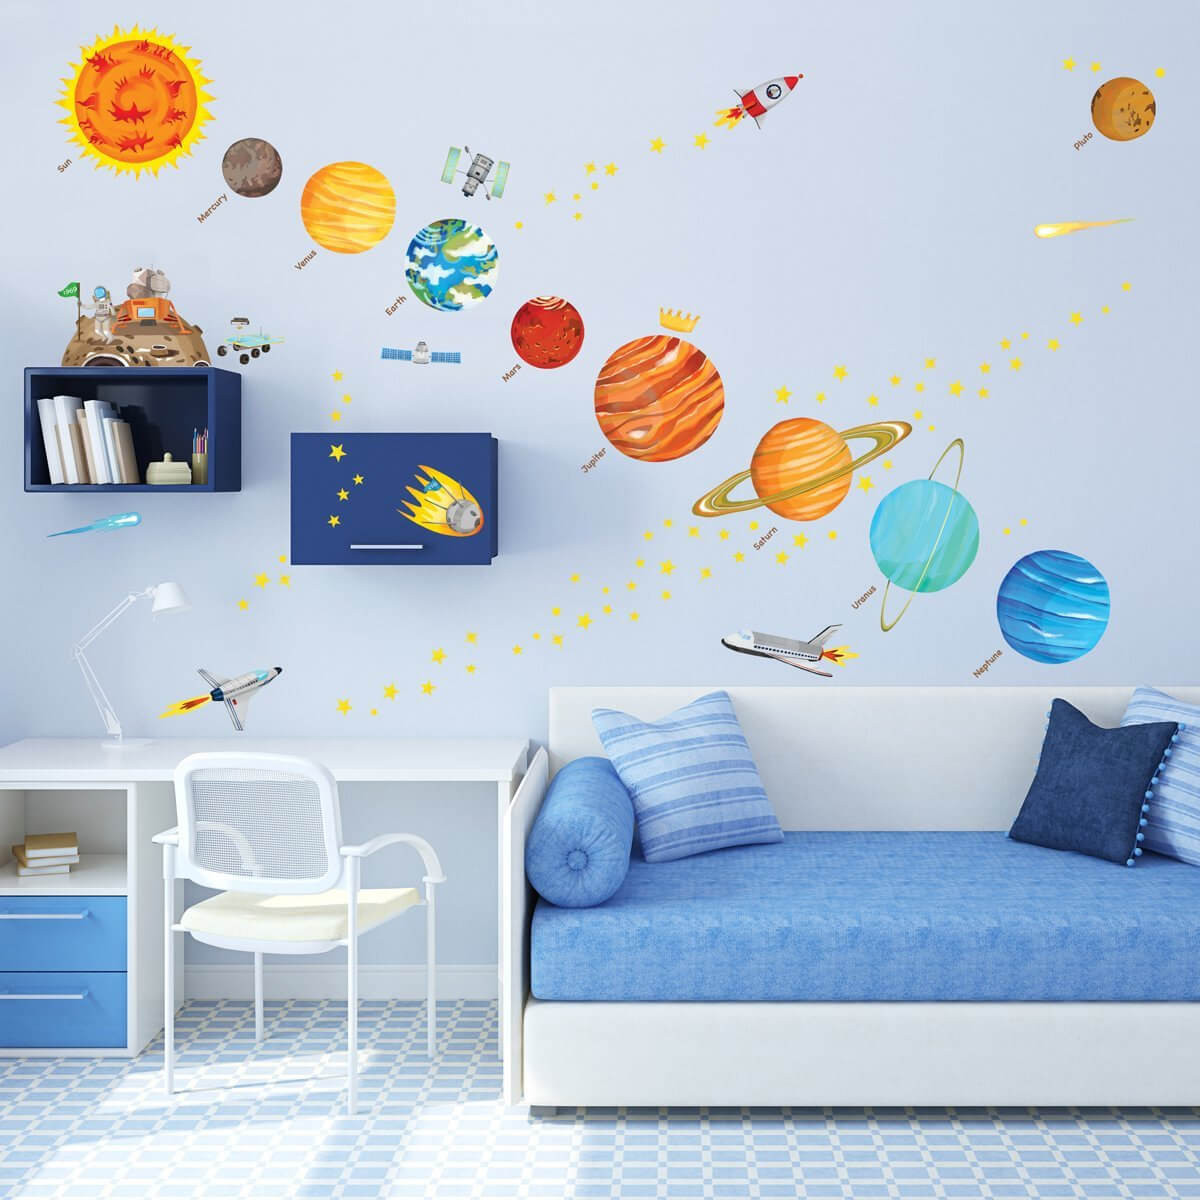 Kids Wall Decor
 These Educational Wall Ideas are Perfect for Kids